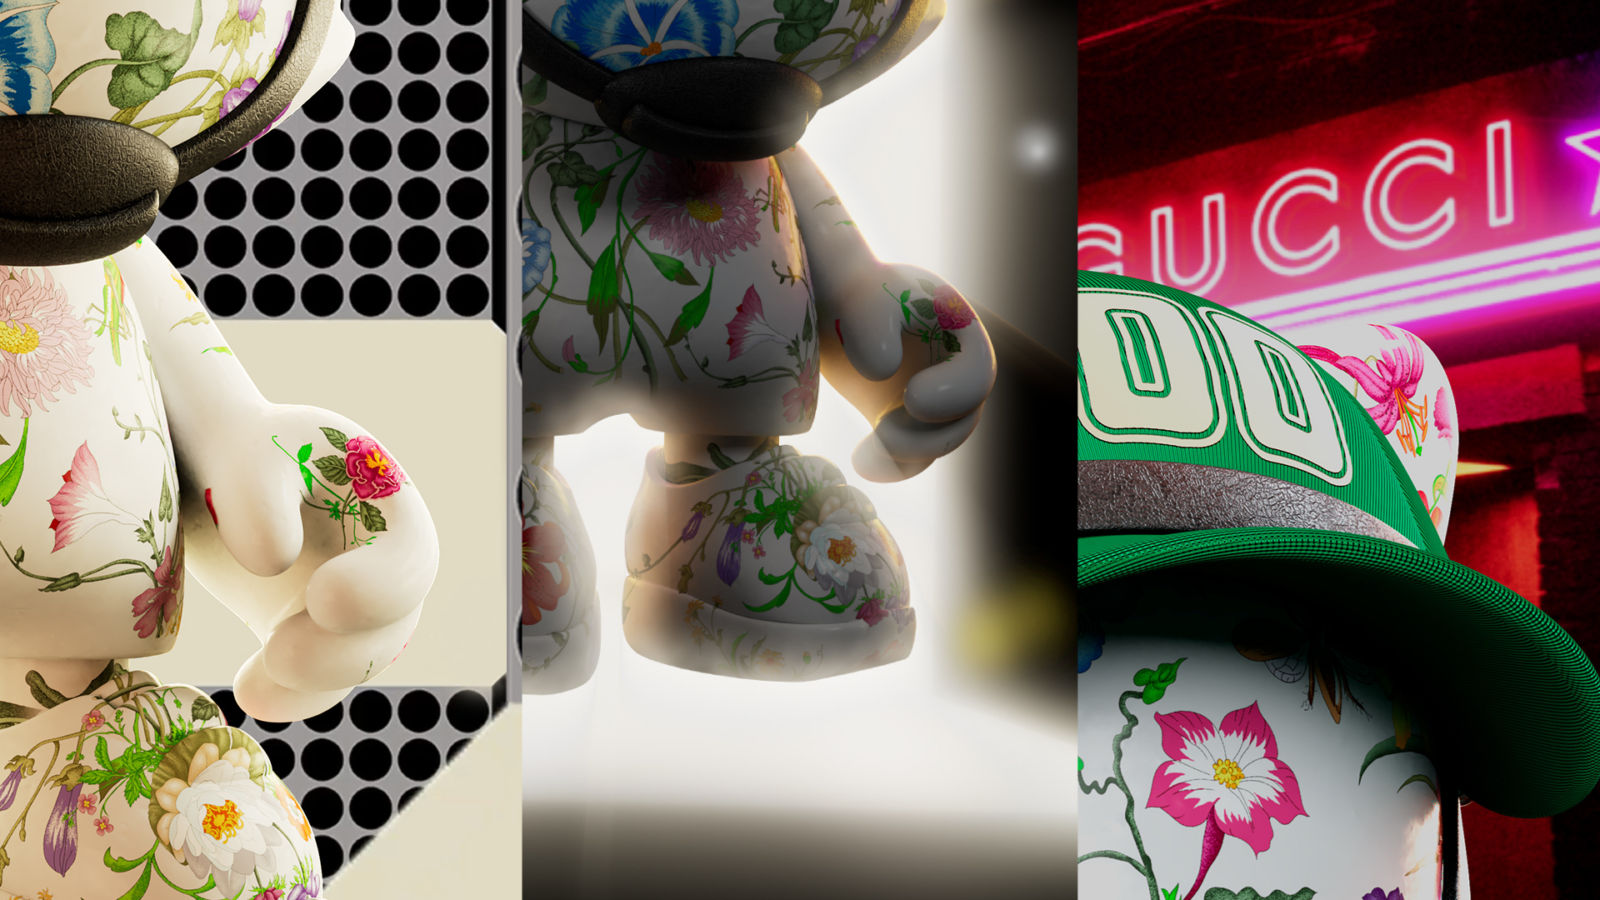 Gucci and Superplastics team up to create NFTs and handmade collectibles called SUPERGUCCI